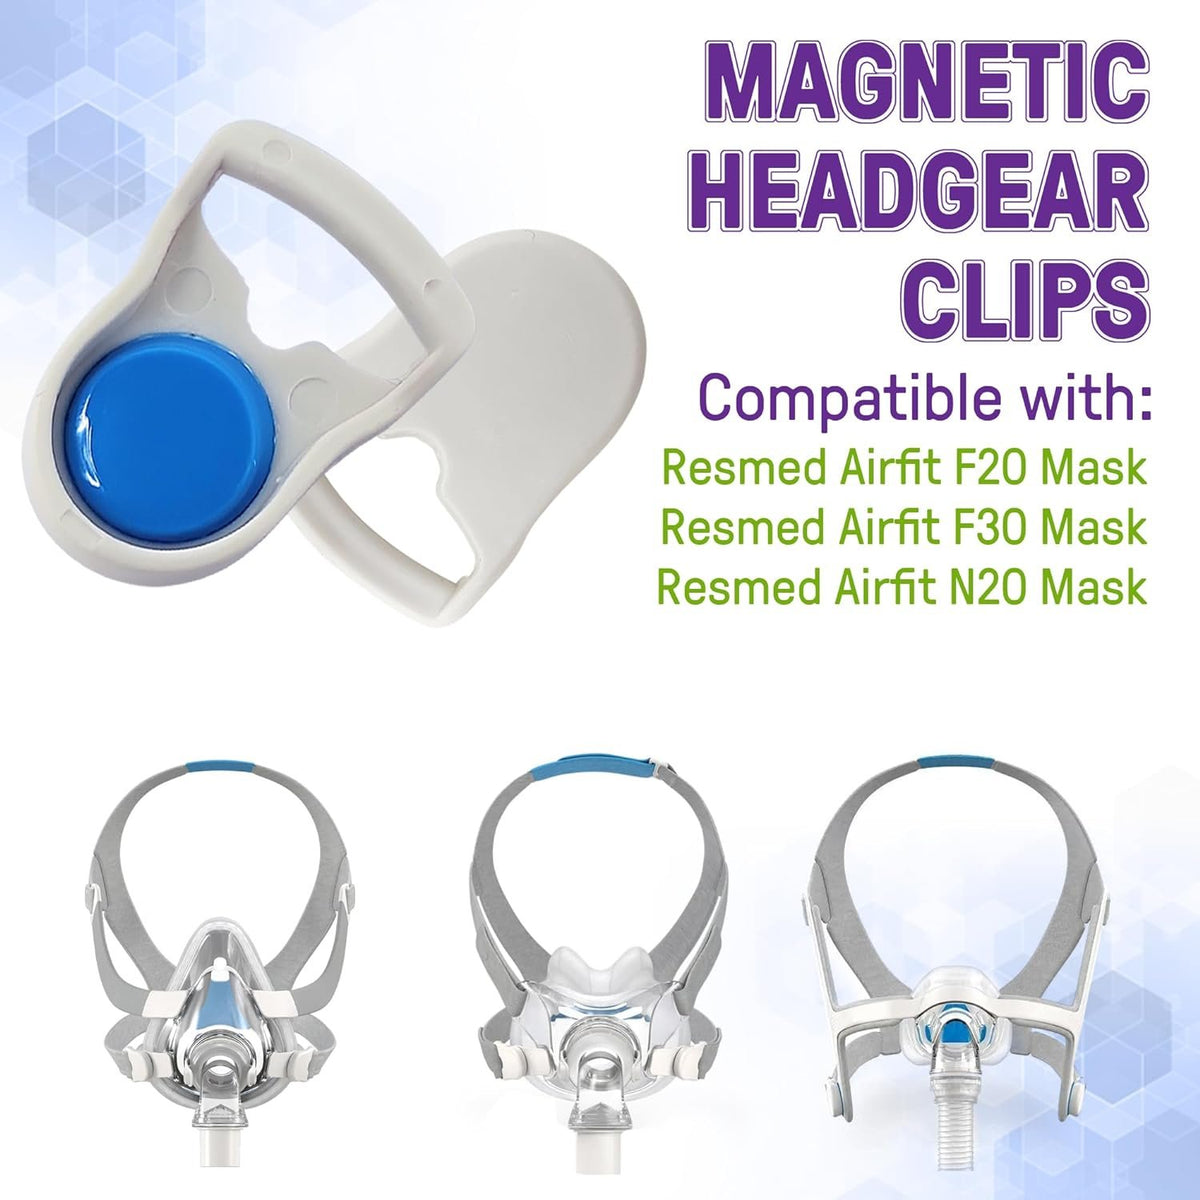 Mars Wellness Magnetic Headgear Clips - 4 Pack Quick Disconnect Clips Compatible with Airfit F20, CPAP Masks Full Face, Resmed Airfit F20, F30, N20 Mask - Ideal for CPAP Machine Users